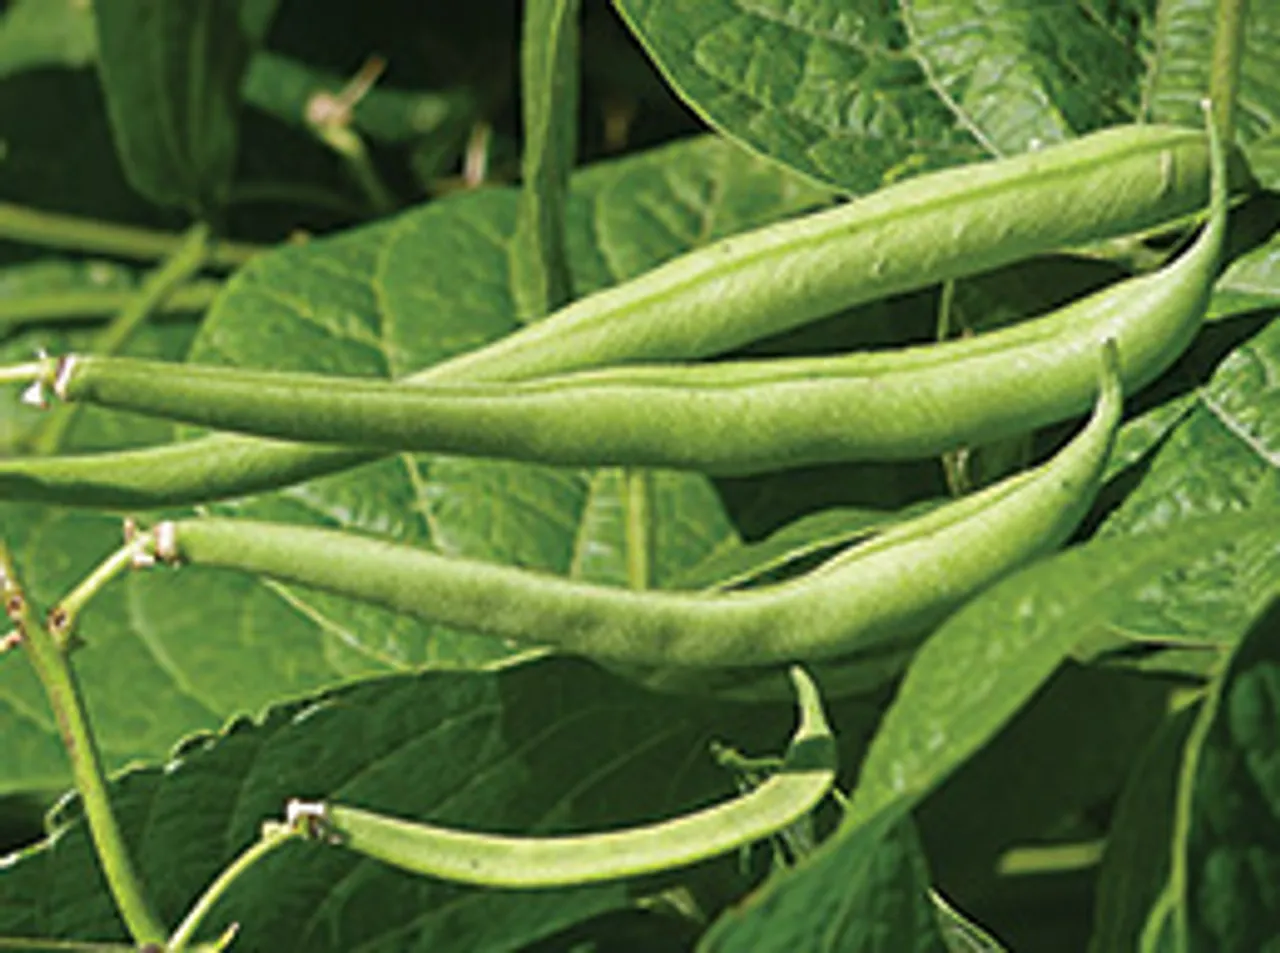 What is French about the French beans